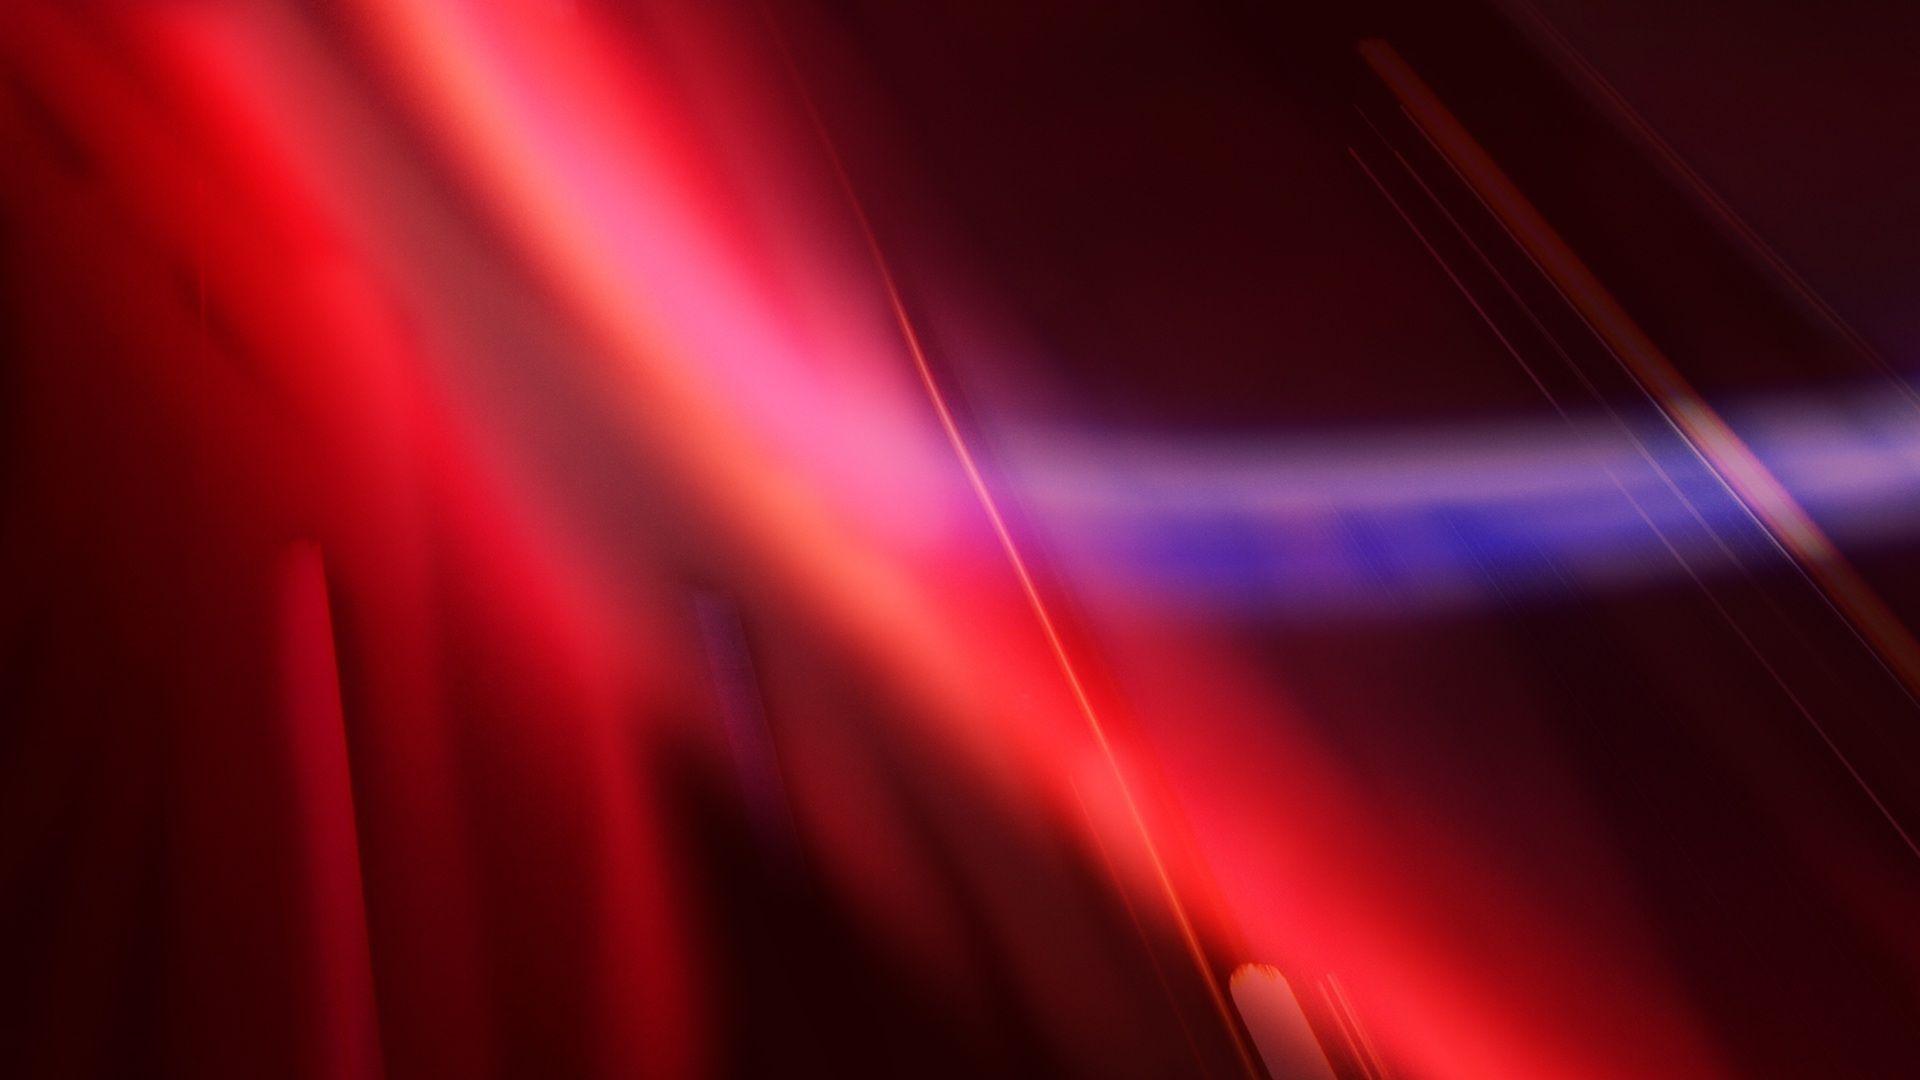 Abstract Background Red Background 1 HD Wallpaper